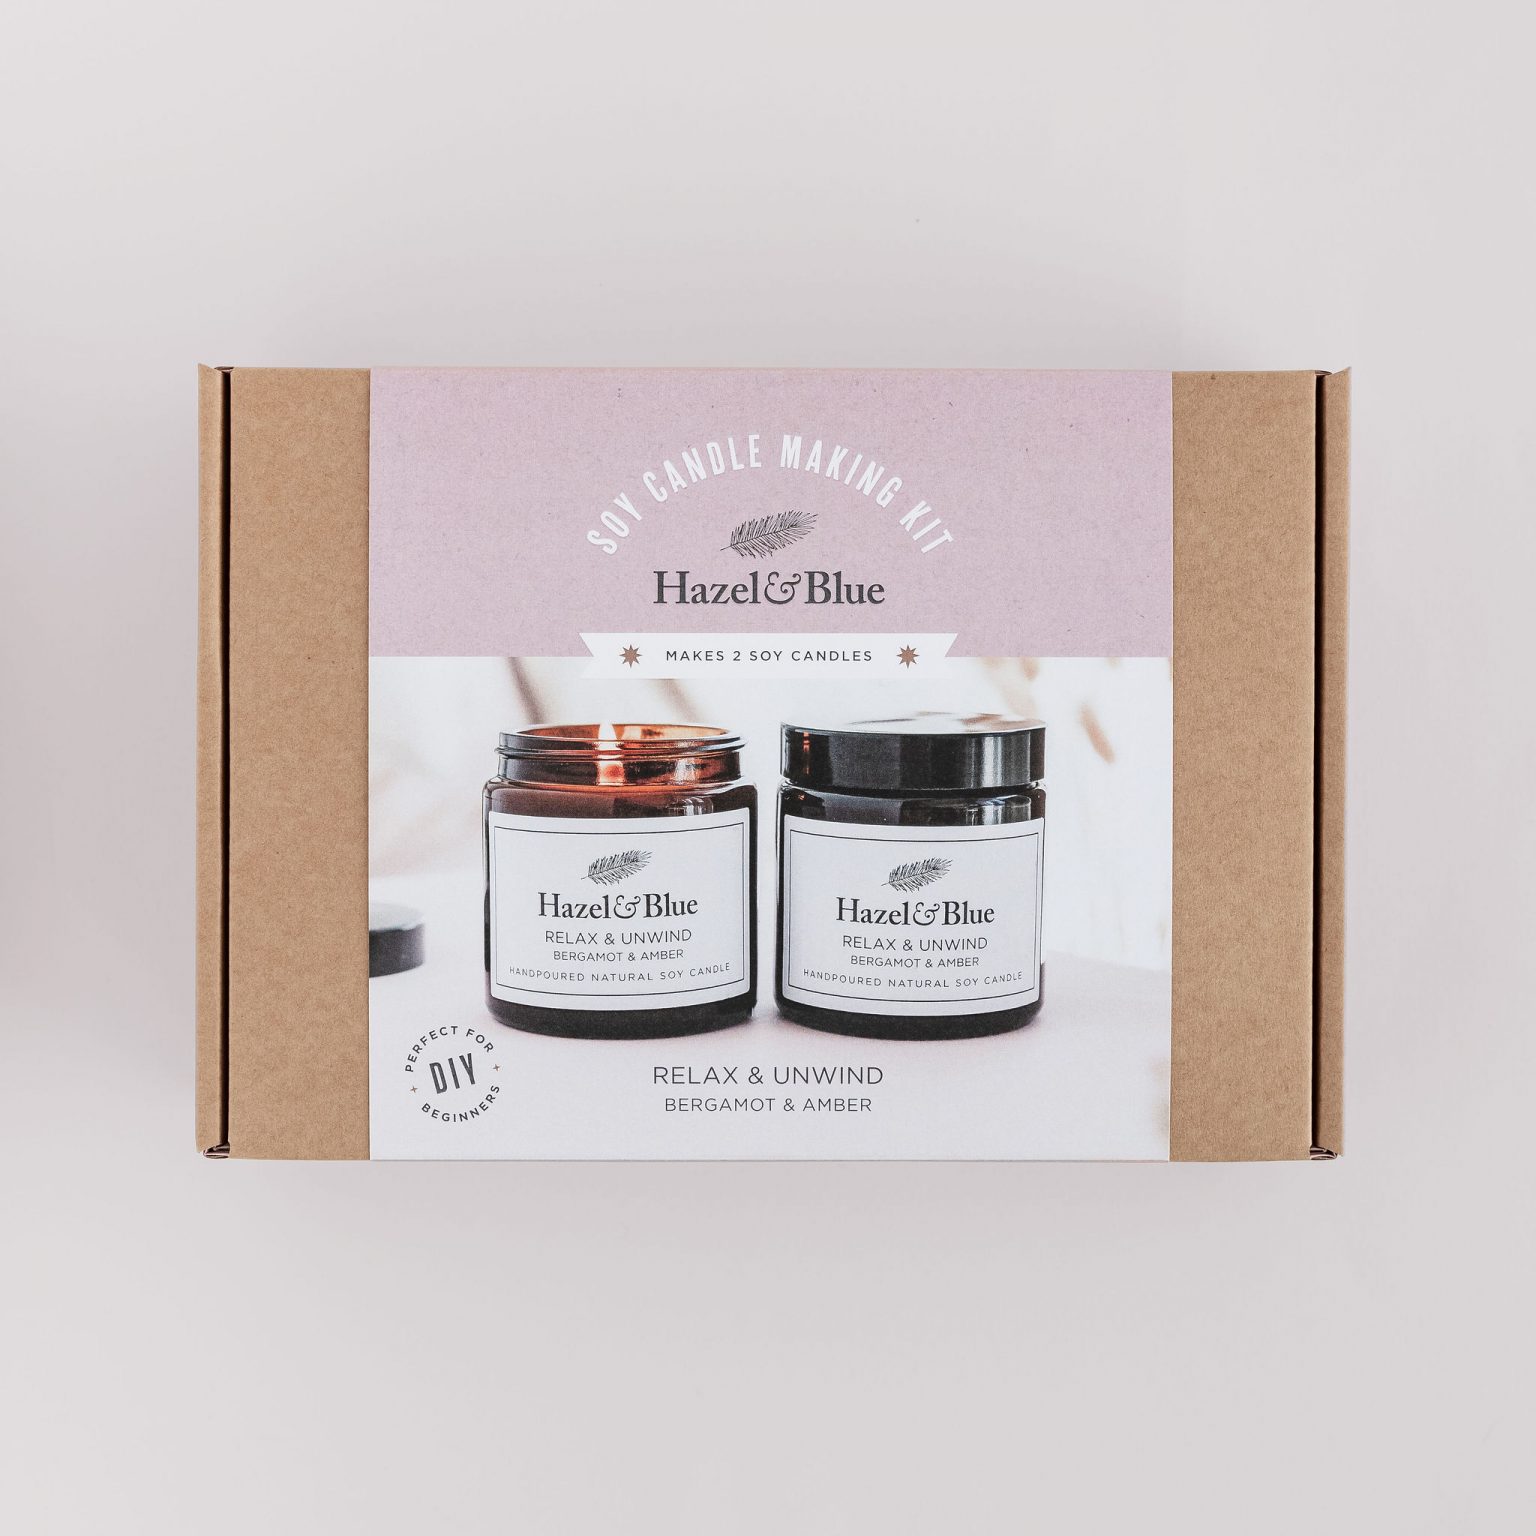 relax and unwind soy candle making kit for beginners learn to make candles easy eco friendly vegan natural hazel and blue candles crafts for adults and children kids